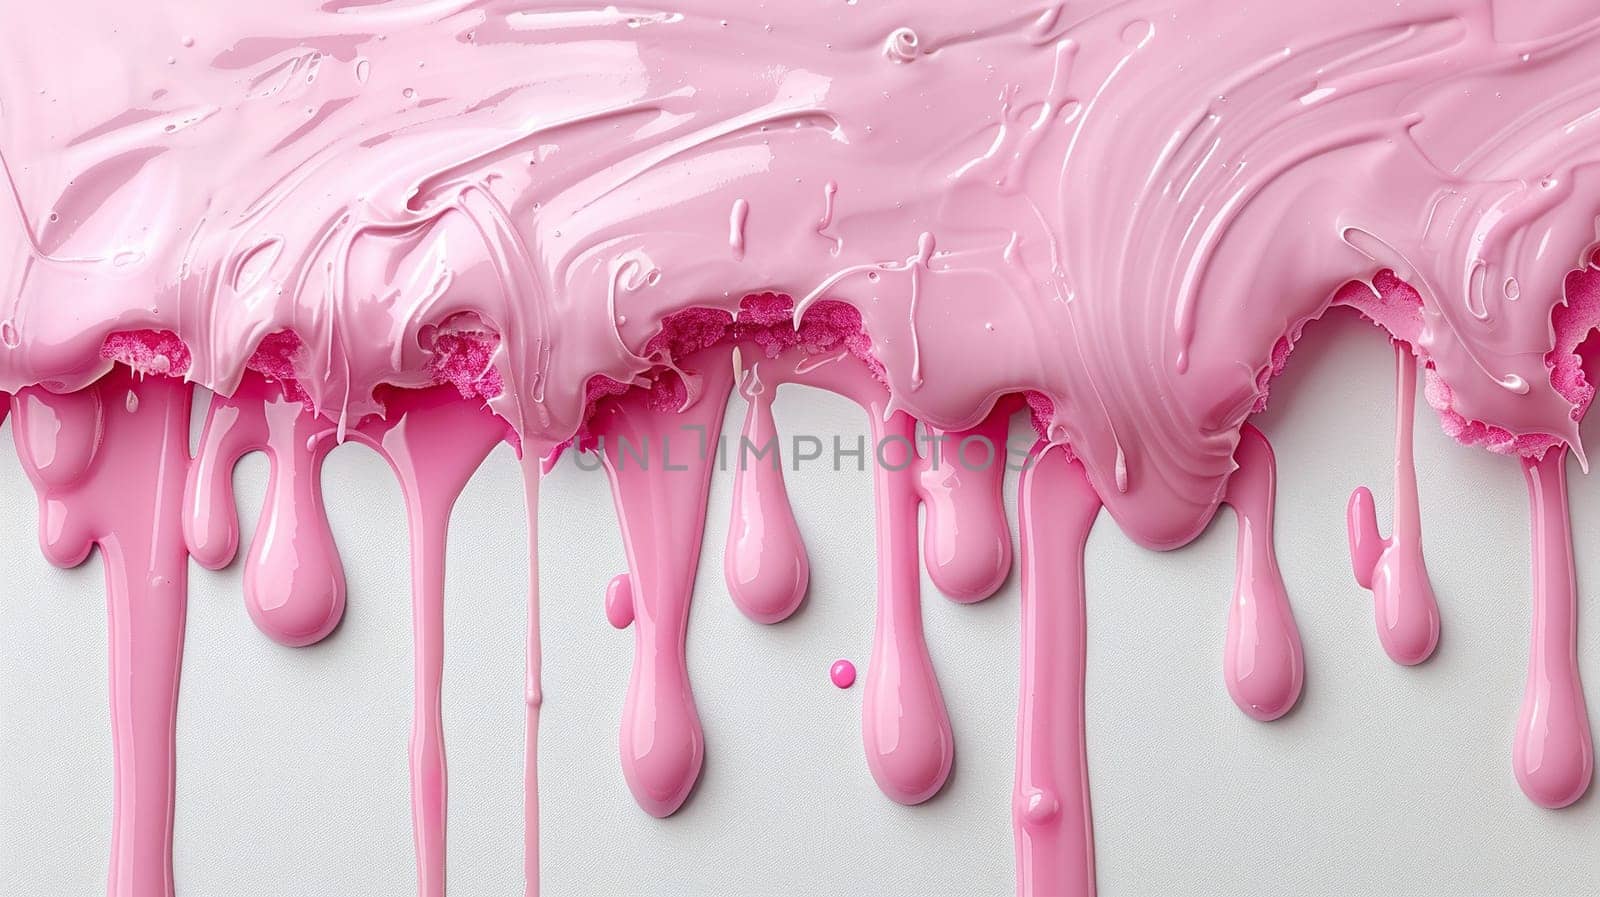 Pink icing flows down the white background from top to bottom.